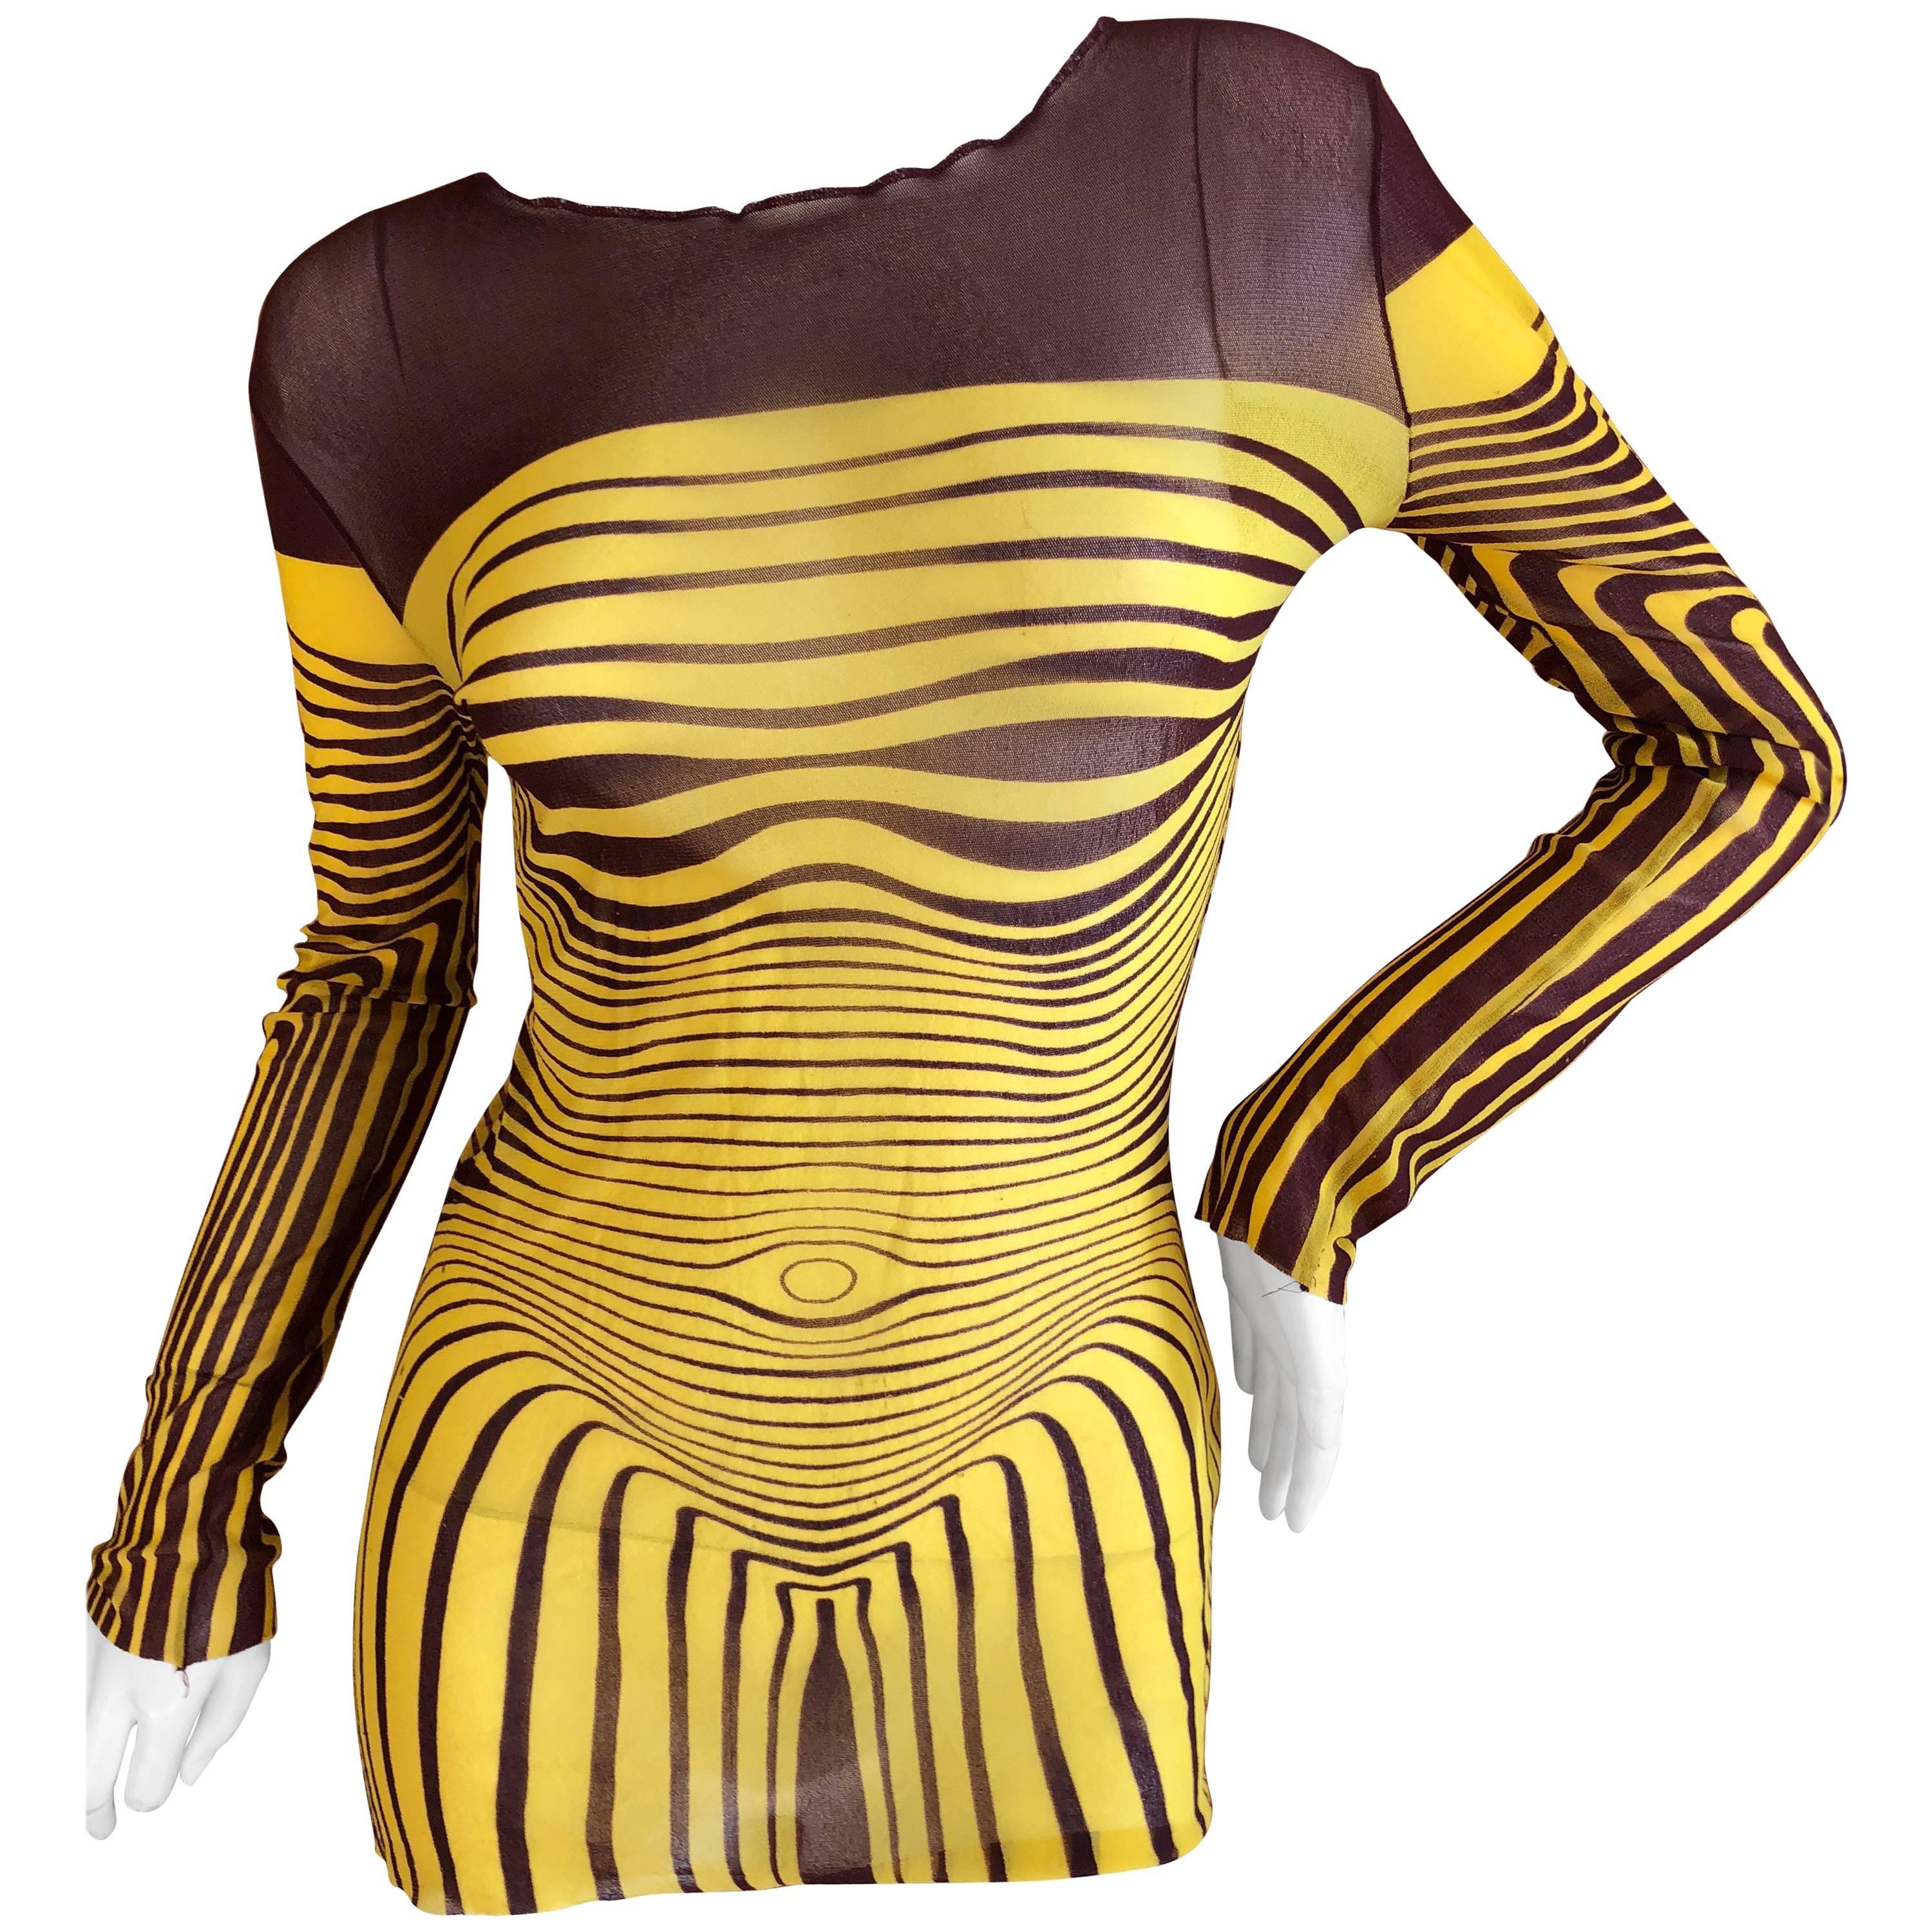 Jean Paul Gaultier Transparent Yellow Purple Optical Illusion Striped Nude Body Sculpture Venus JPG Tattoo Vintage 90s 1996 SS Mad Max Tee Top Shirt

Jean Paul Gaultier yellow optical illusion printed mesh shirt from the iconic 1996 Spring-Summer